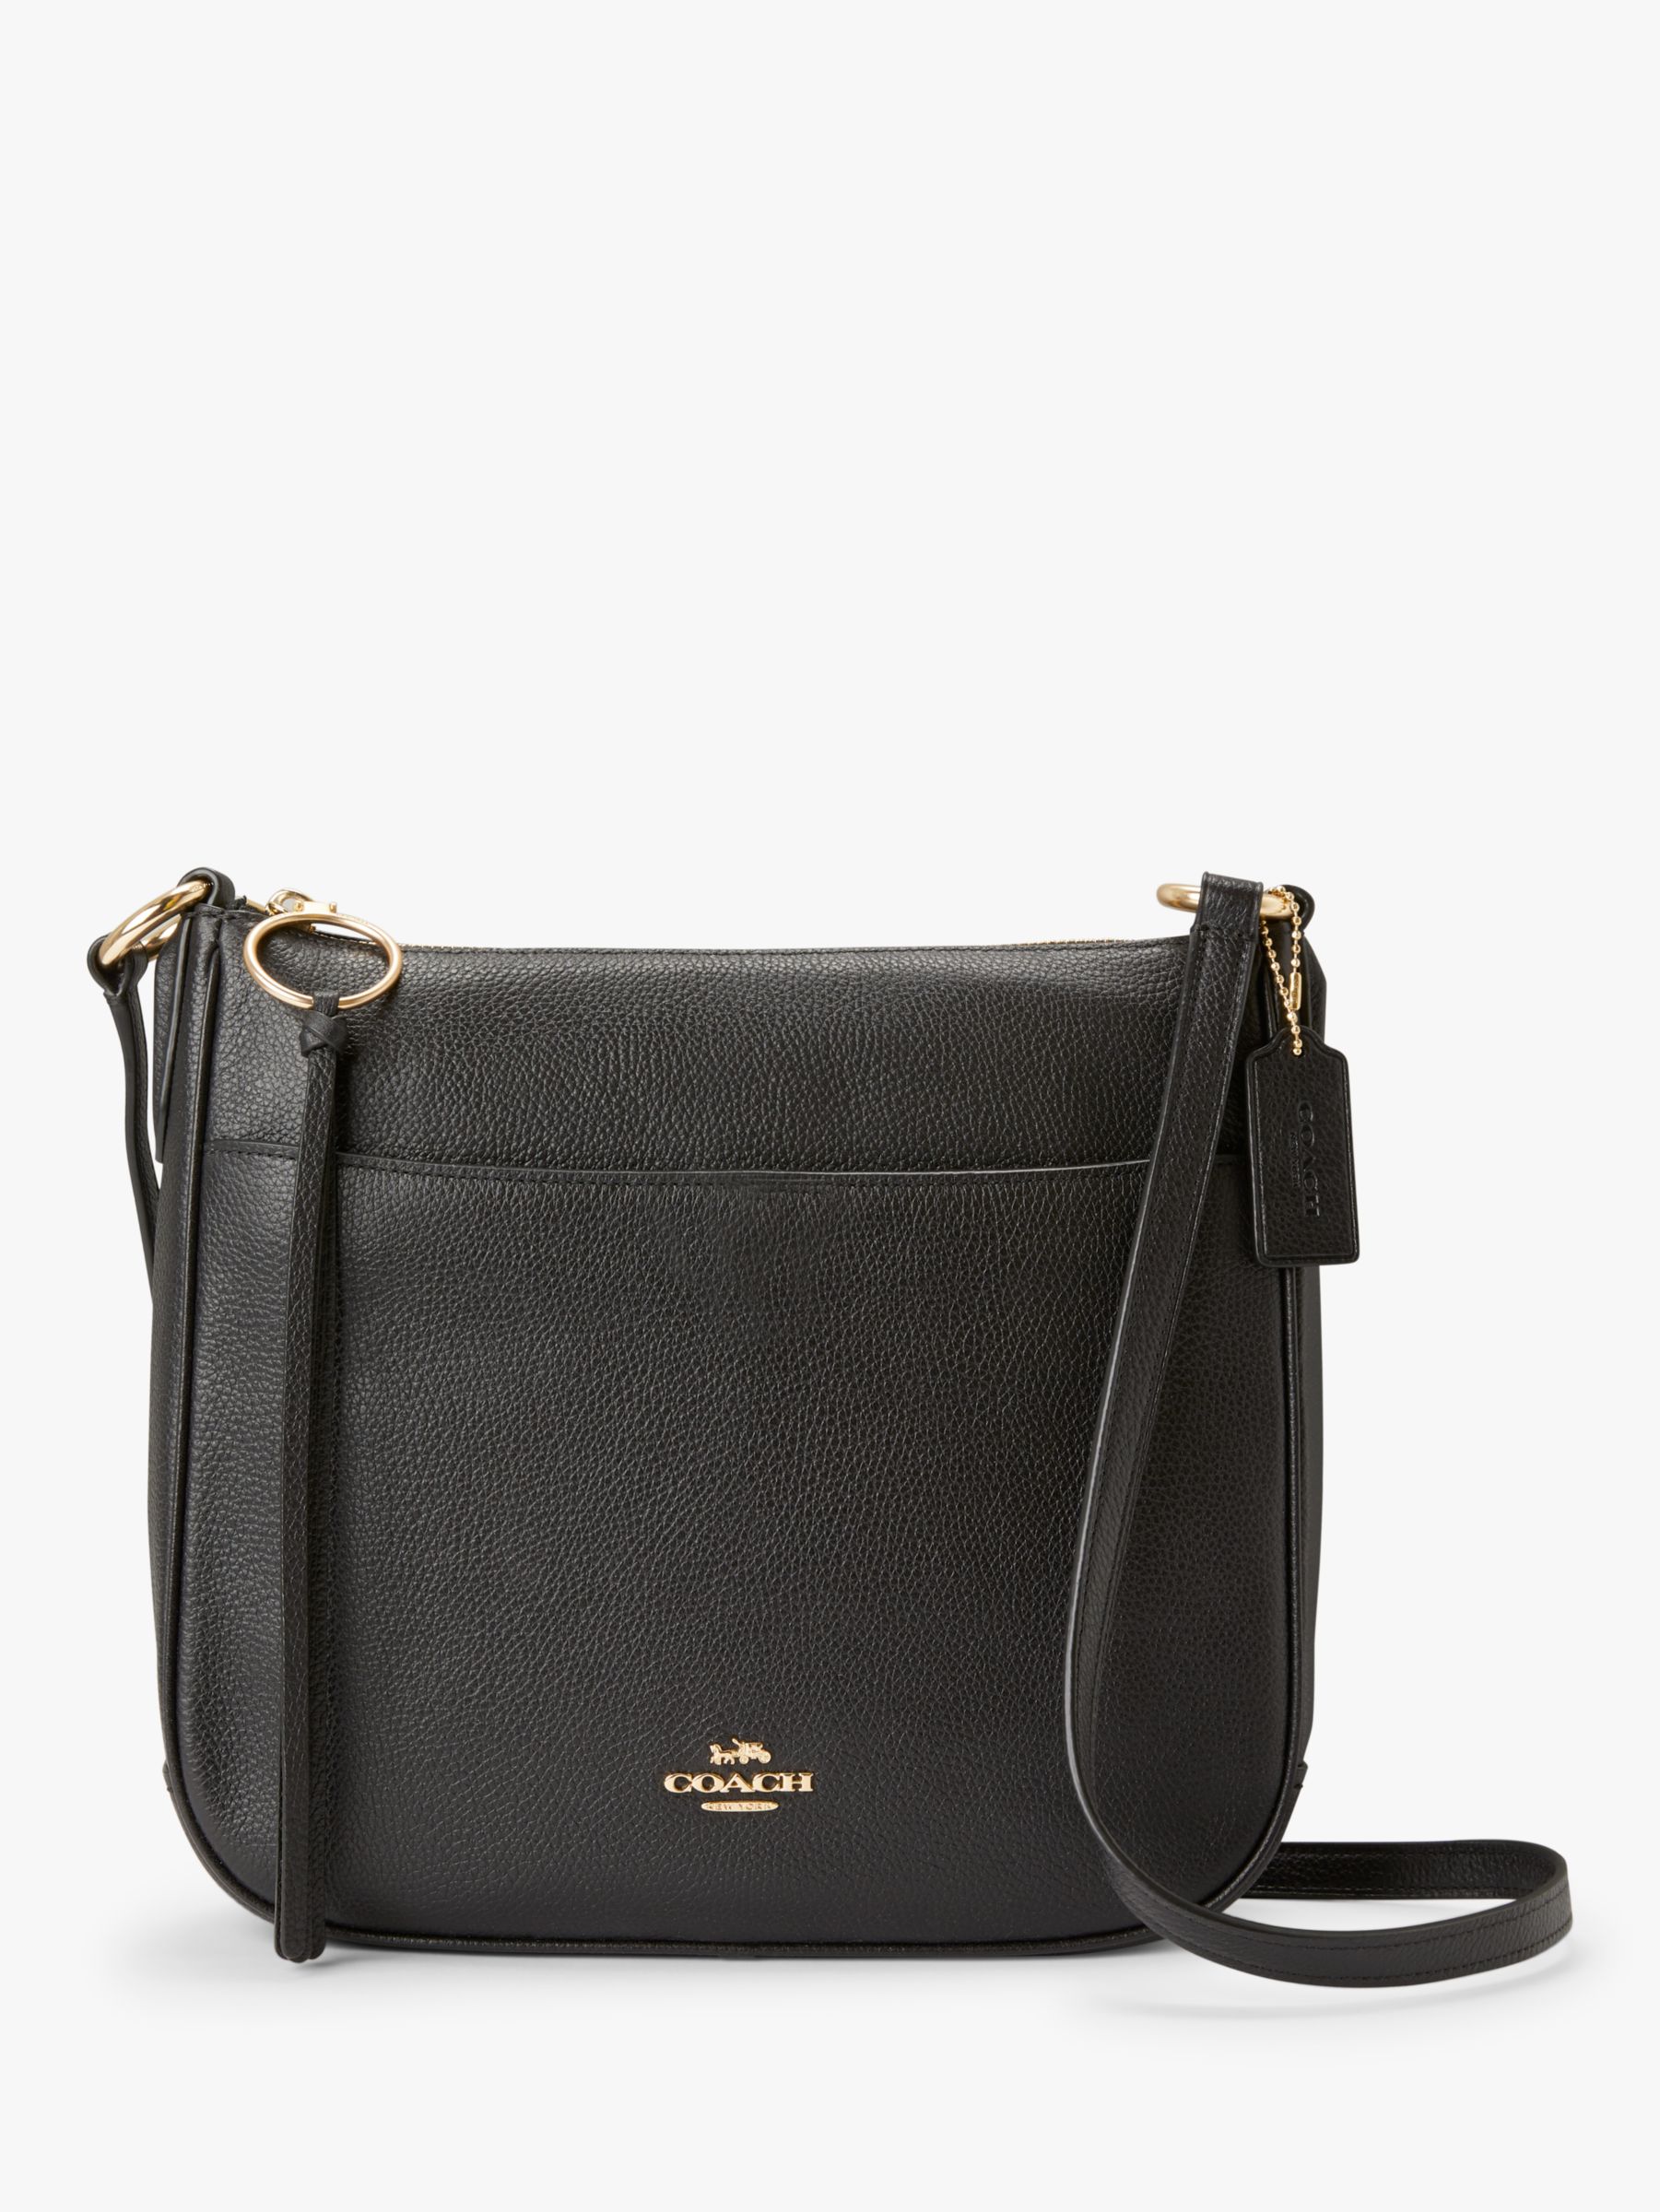 Coach Chaise Pebble Leather Cross Body Bag, Black at John Lewis & Partners